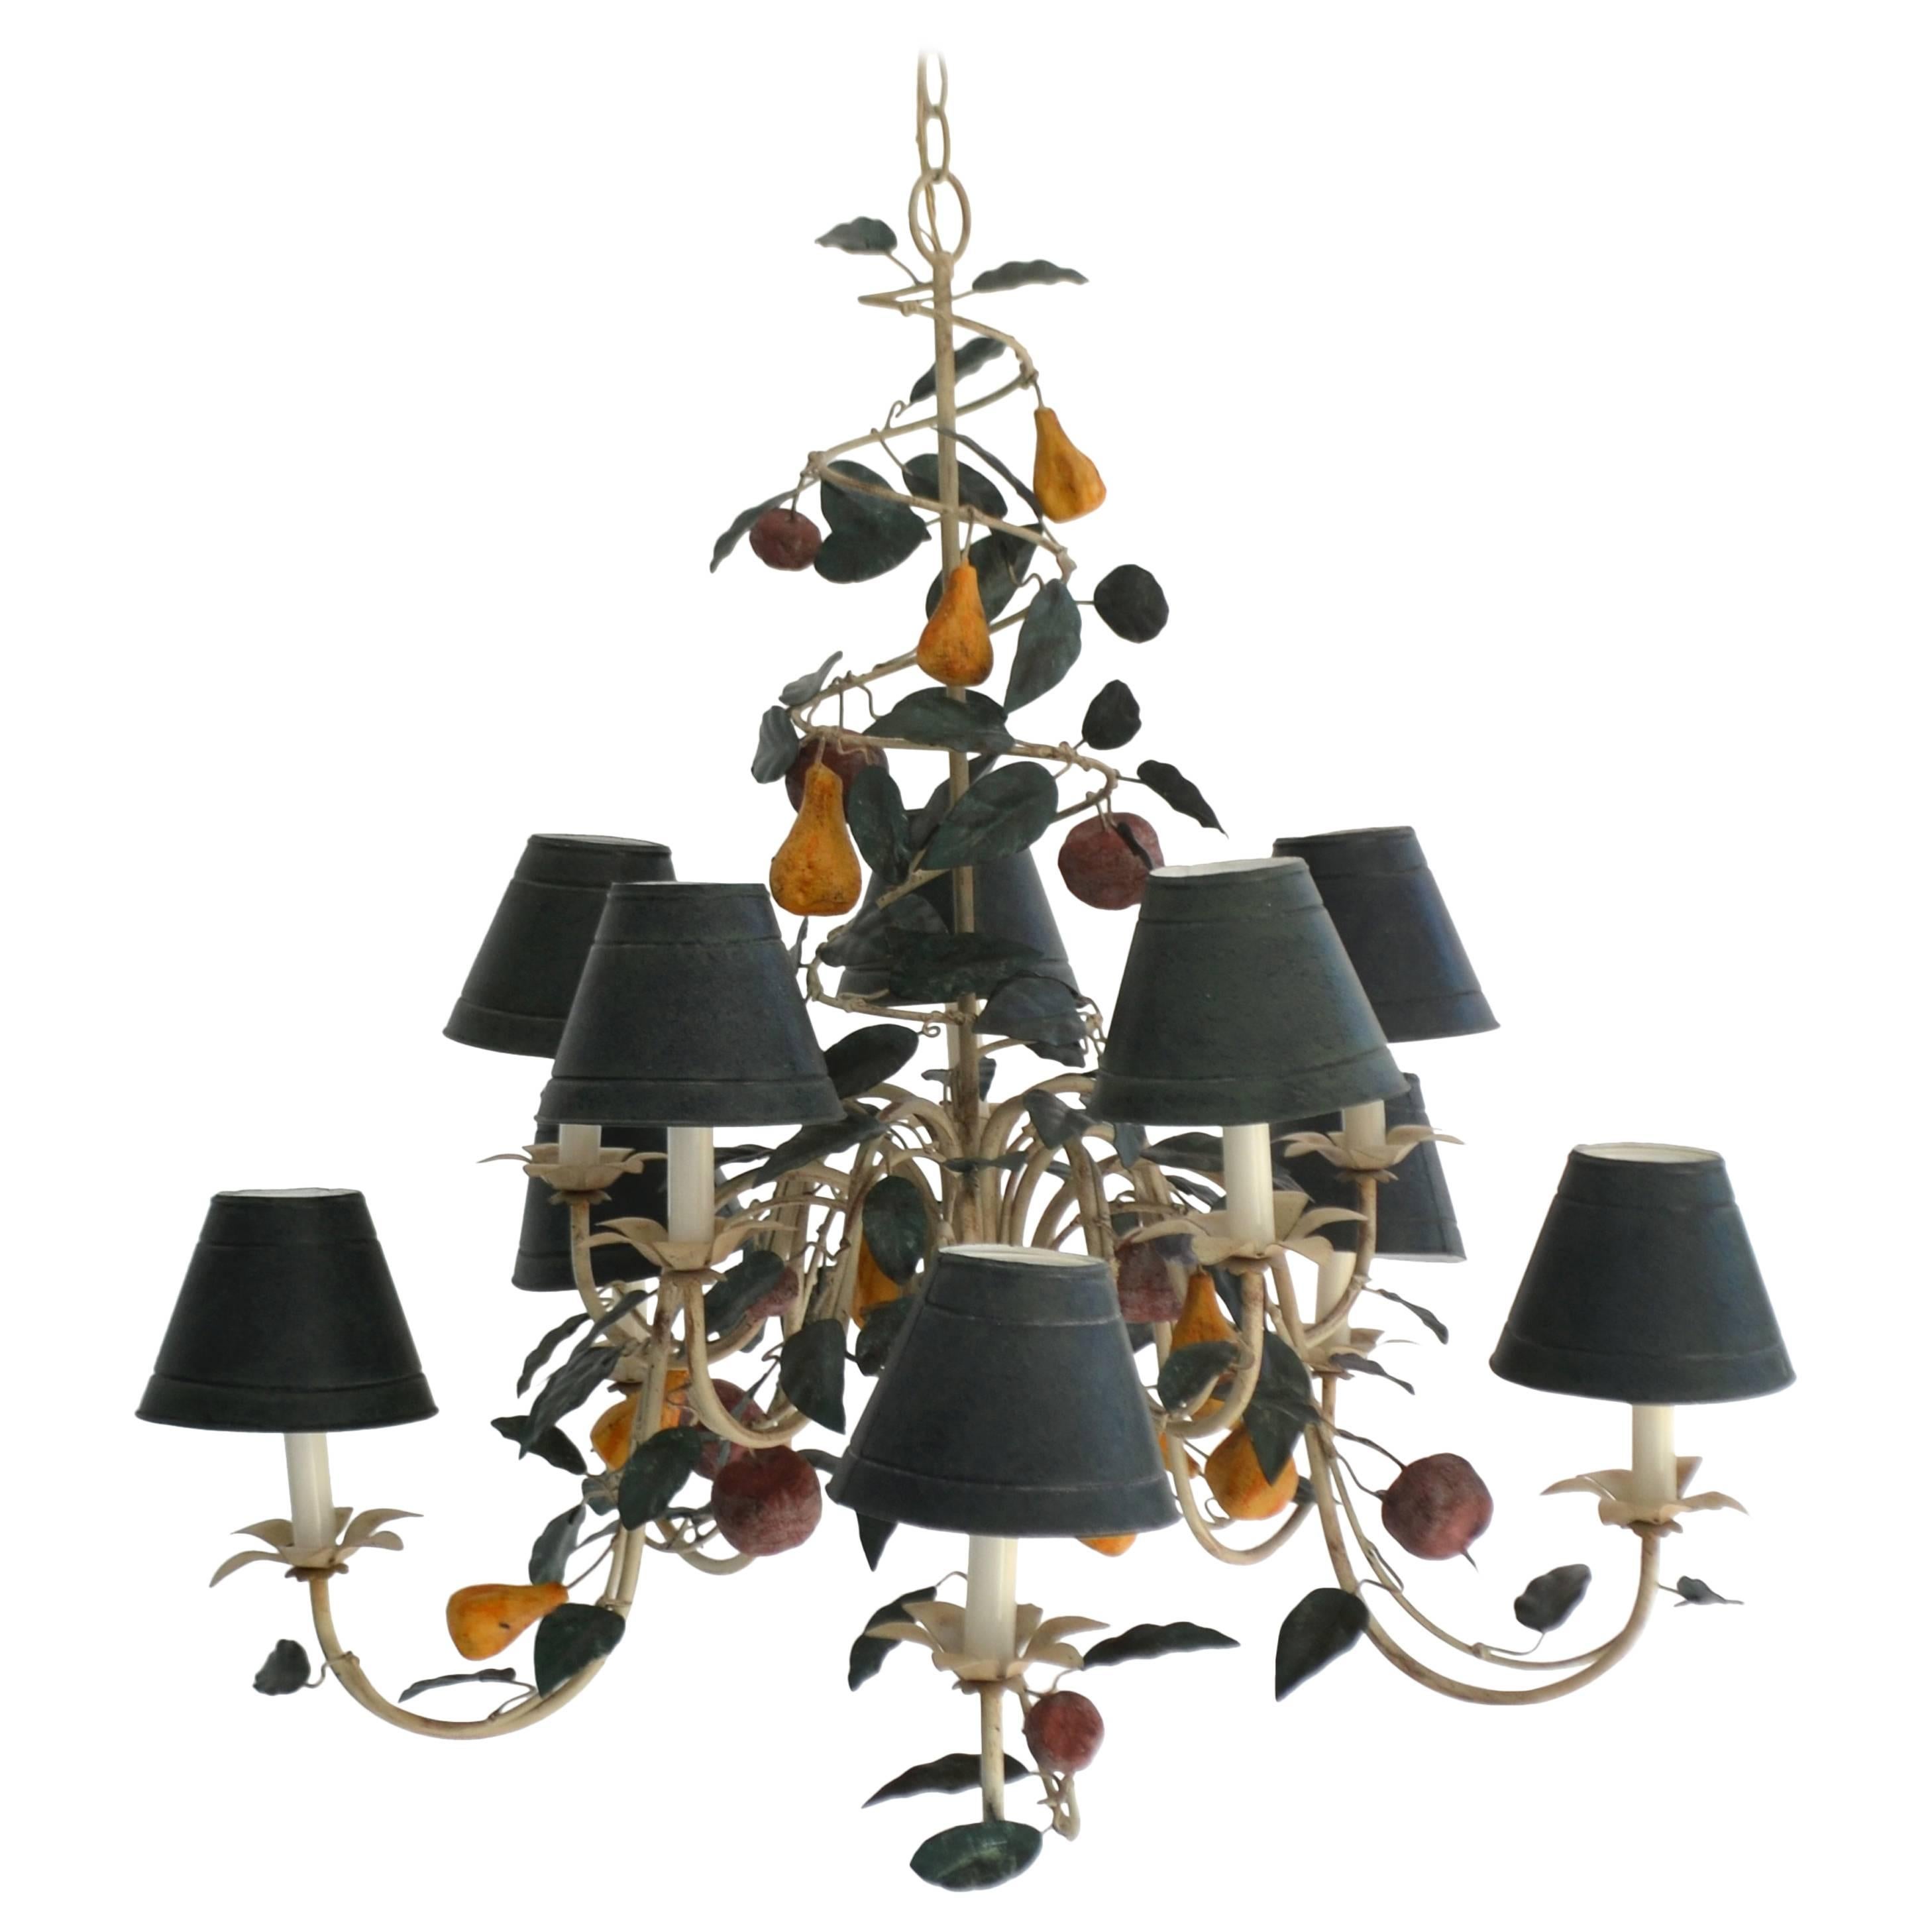 Italian Tole Ten-Arm Chandelier with Tole Shades